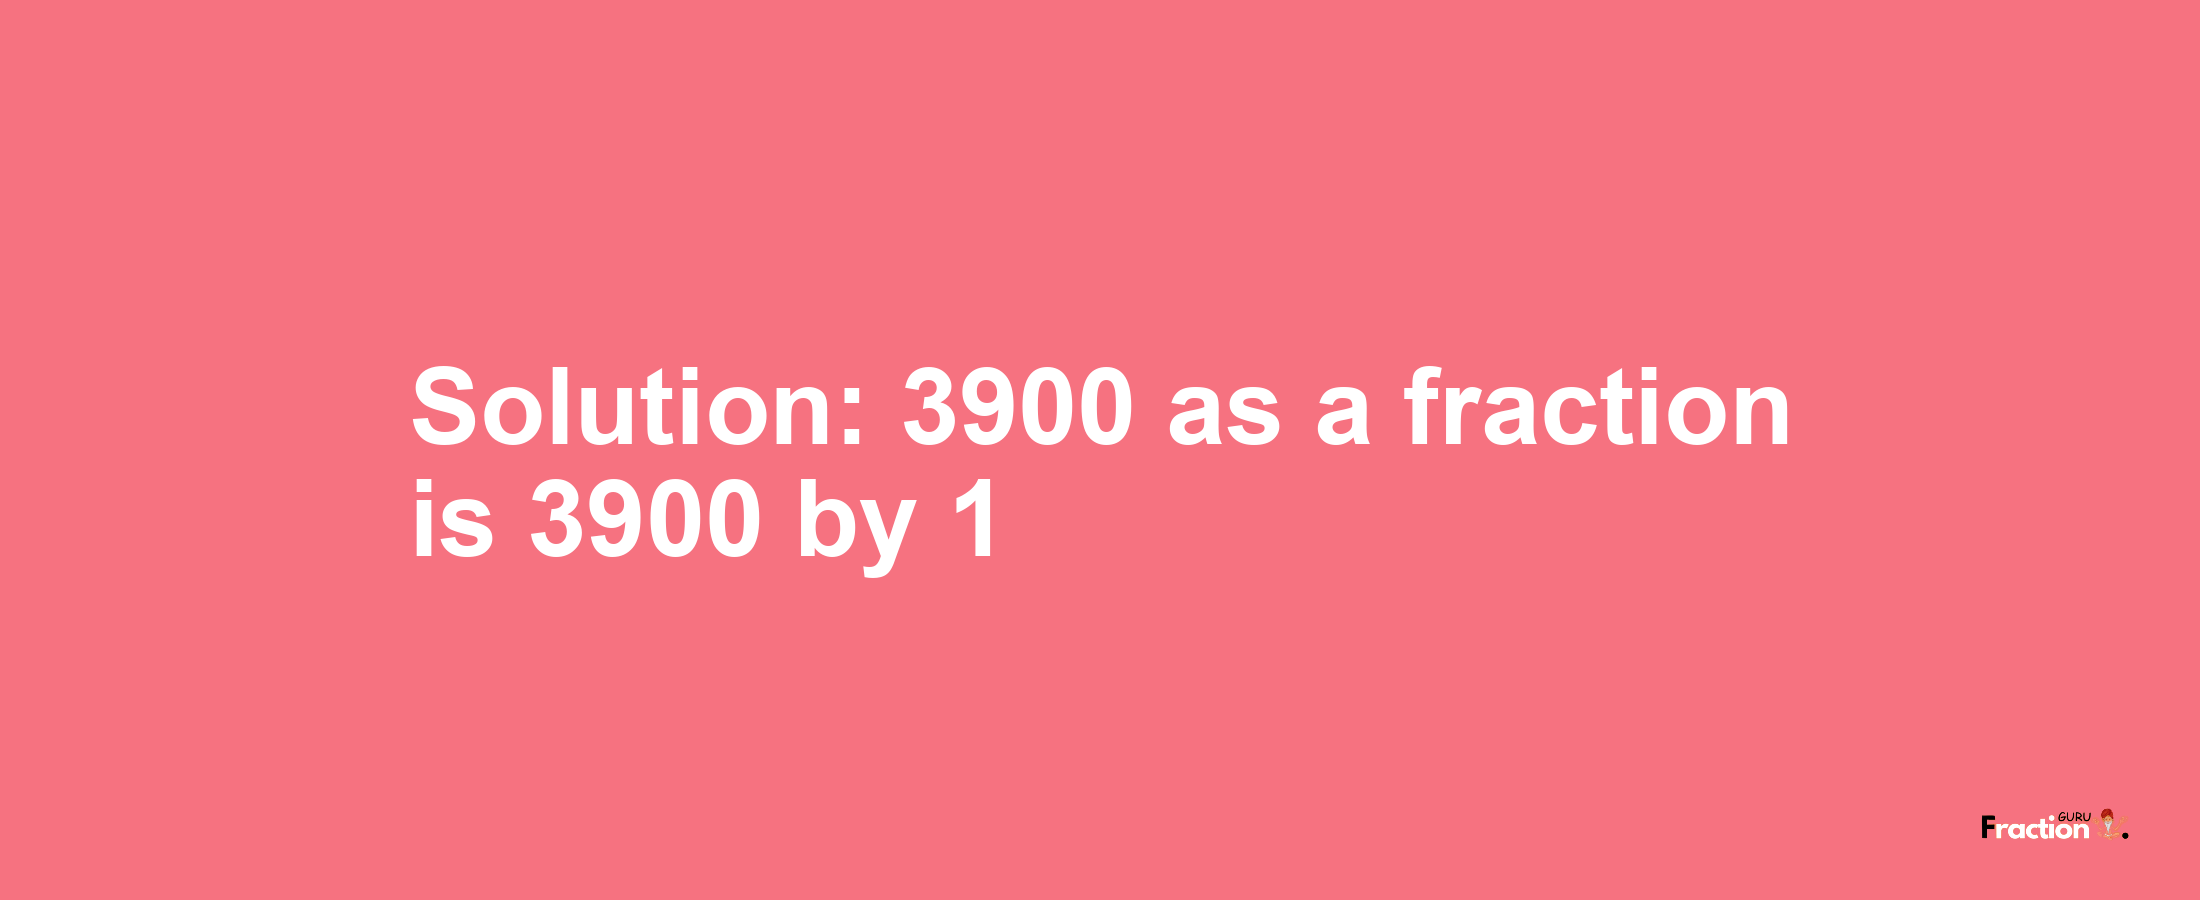 Solution:3900 as a fraction is 3900/1